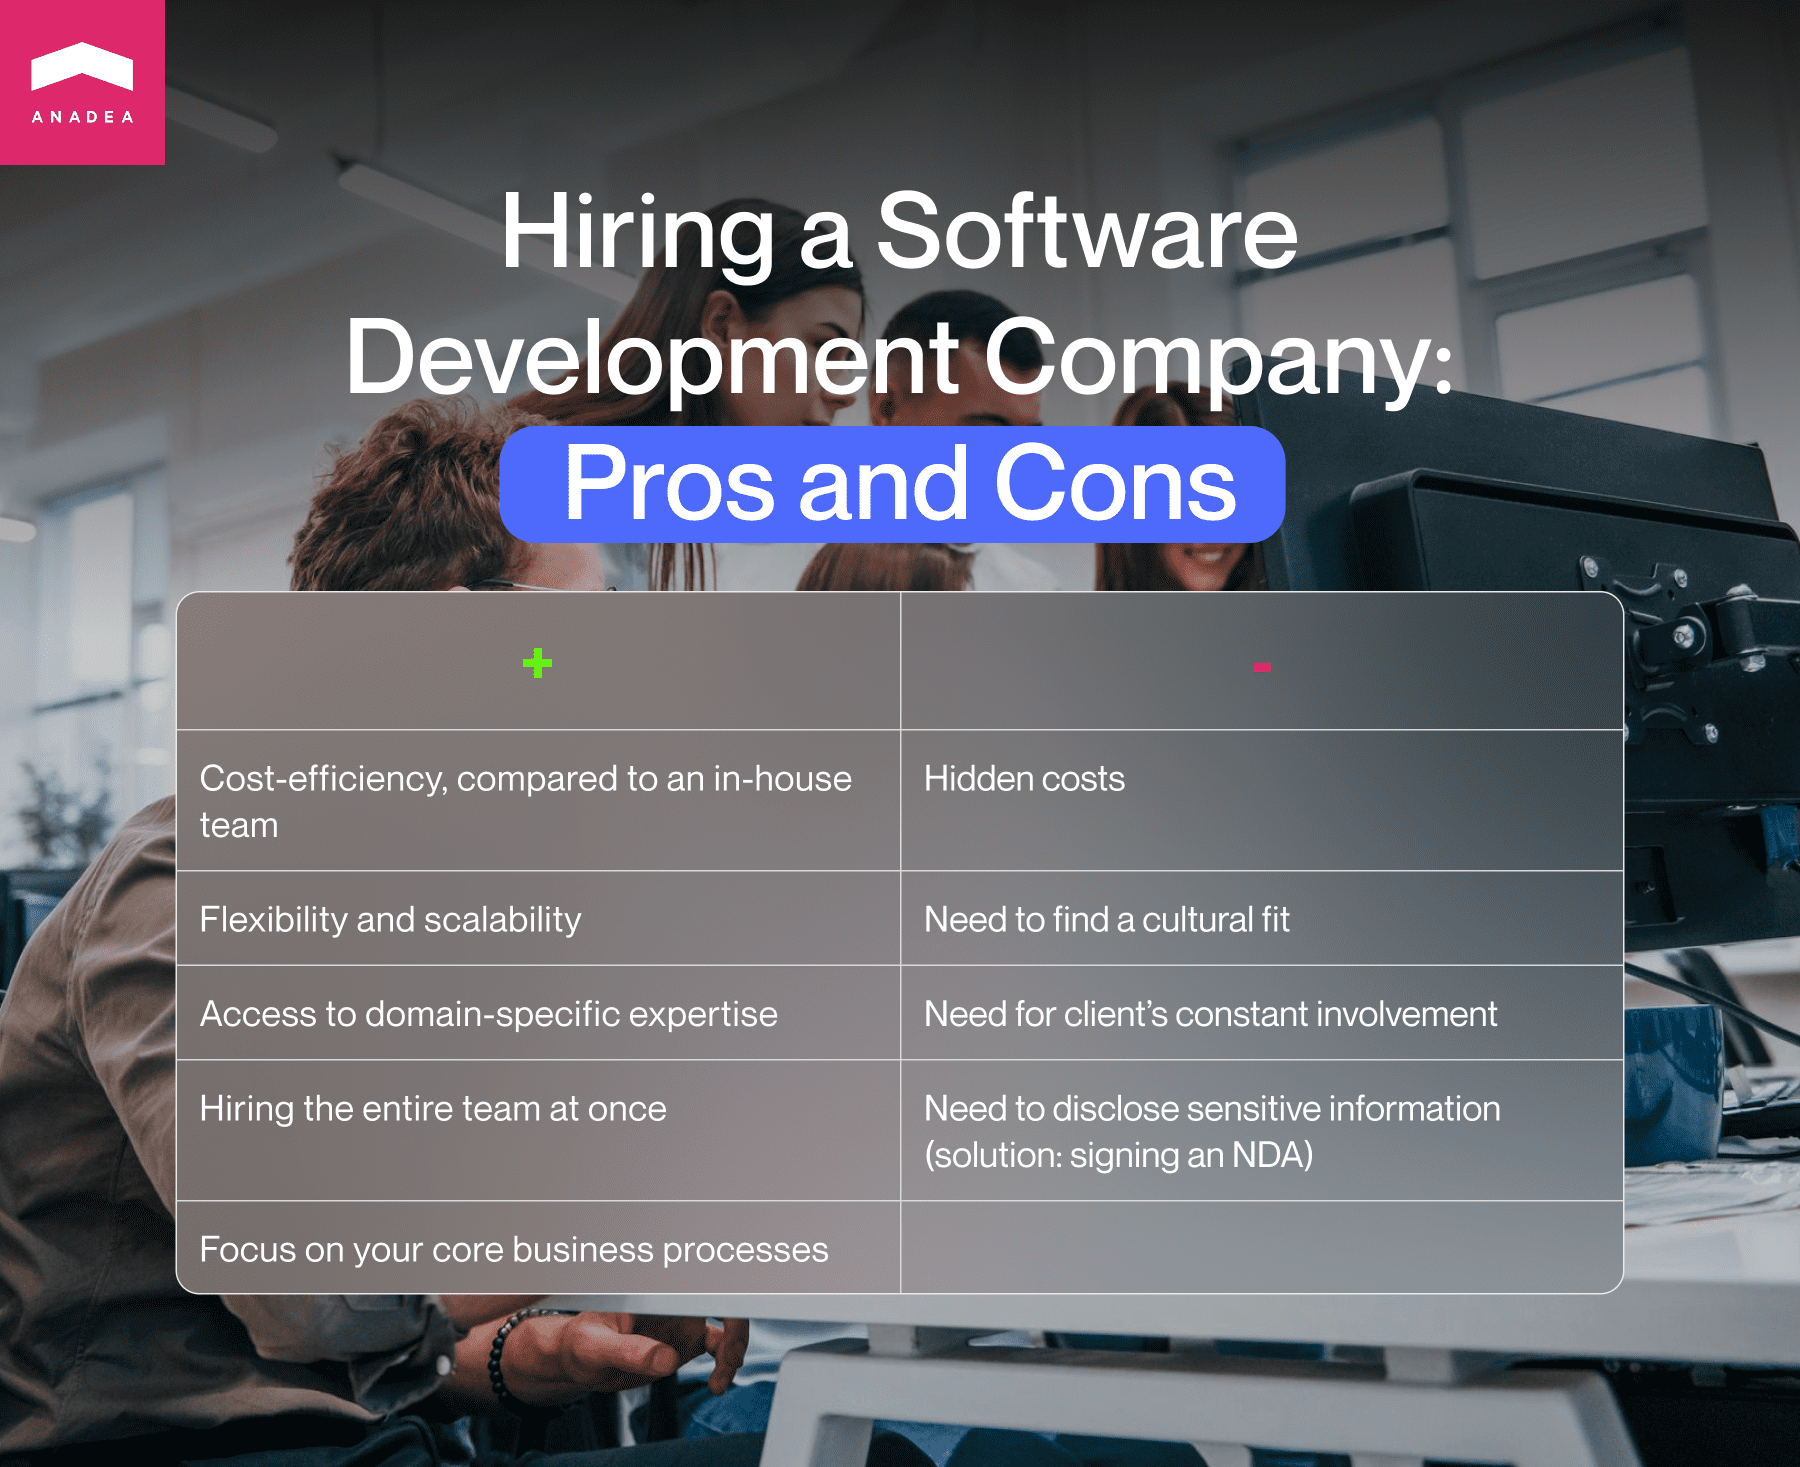 Pros and Cons of hiring software development company